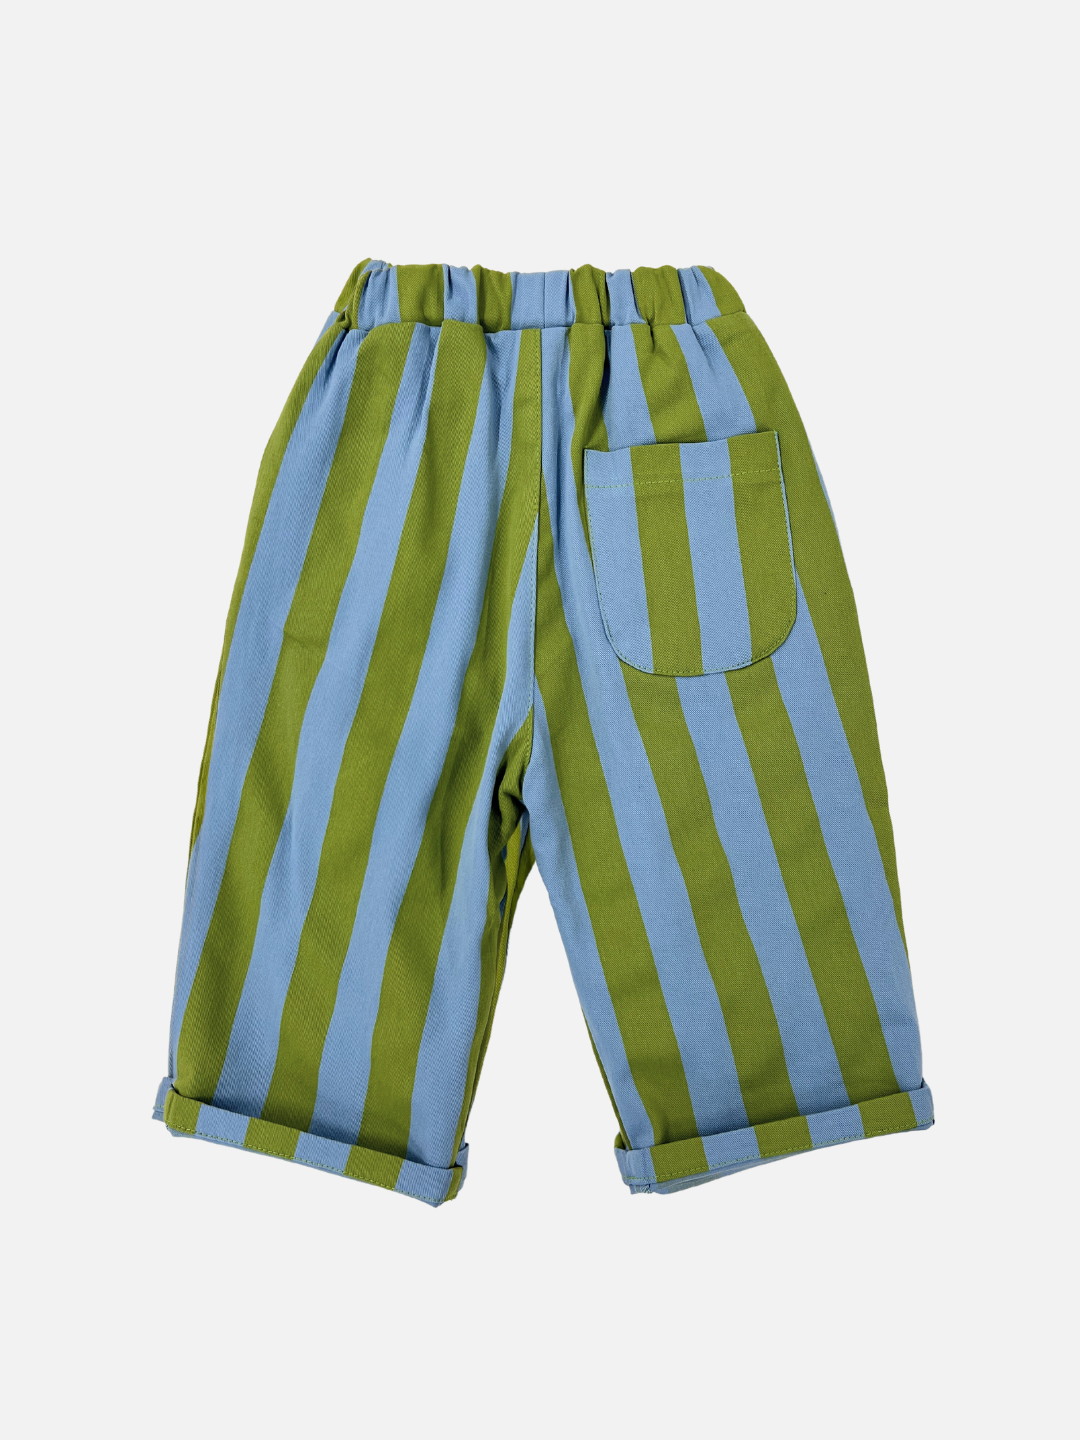 Green | Back view of kids baggy pants in blue with wide green vertical stripes.